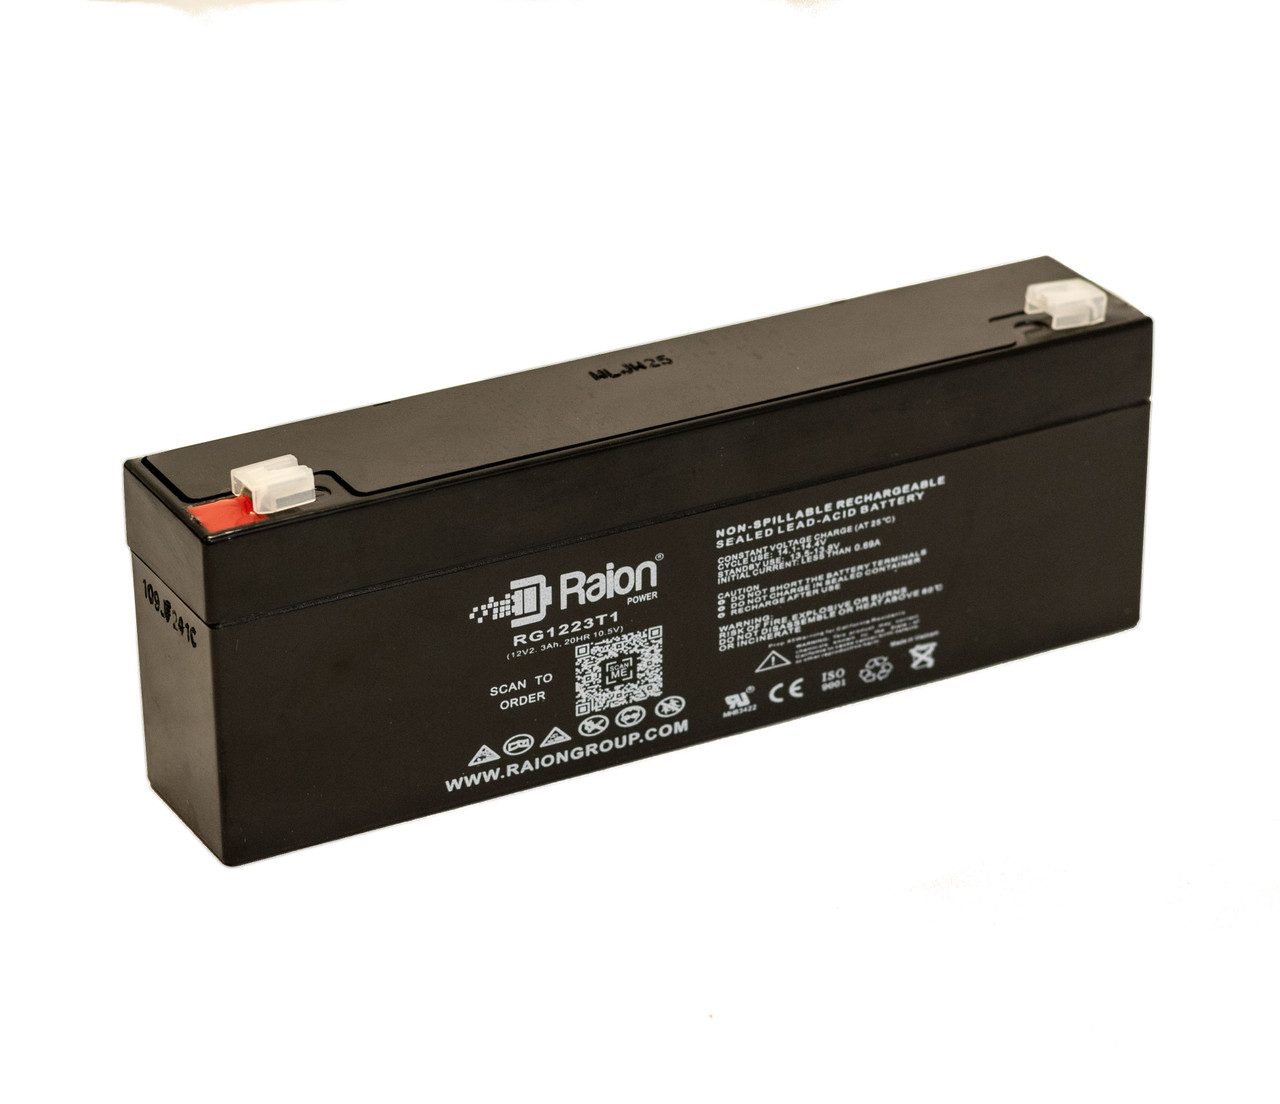 Raion Power RG1223T1 Replacement Battery for Portalac PE1912R